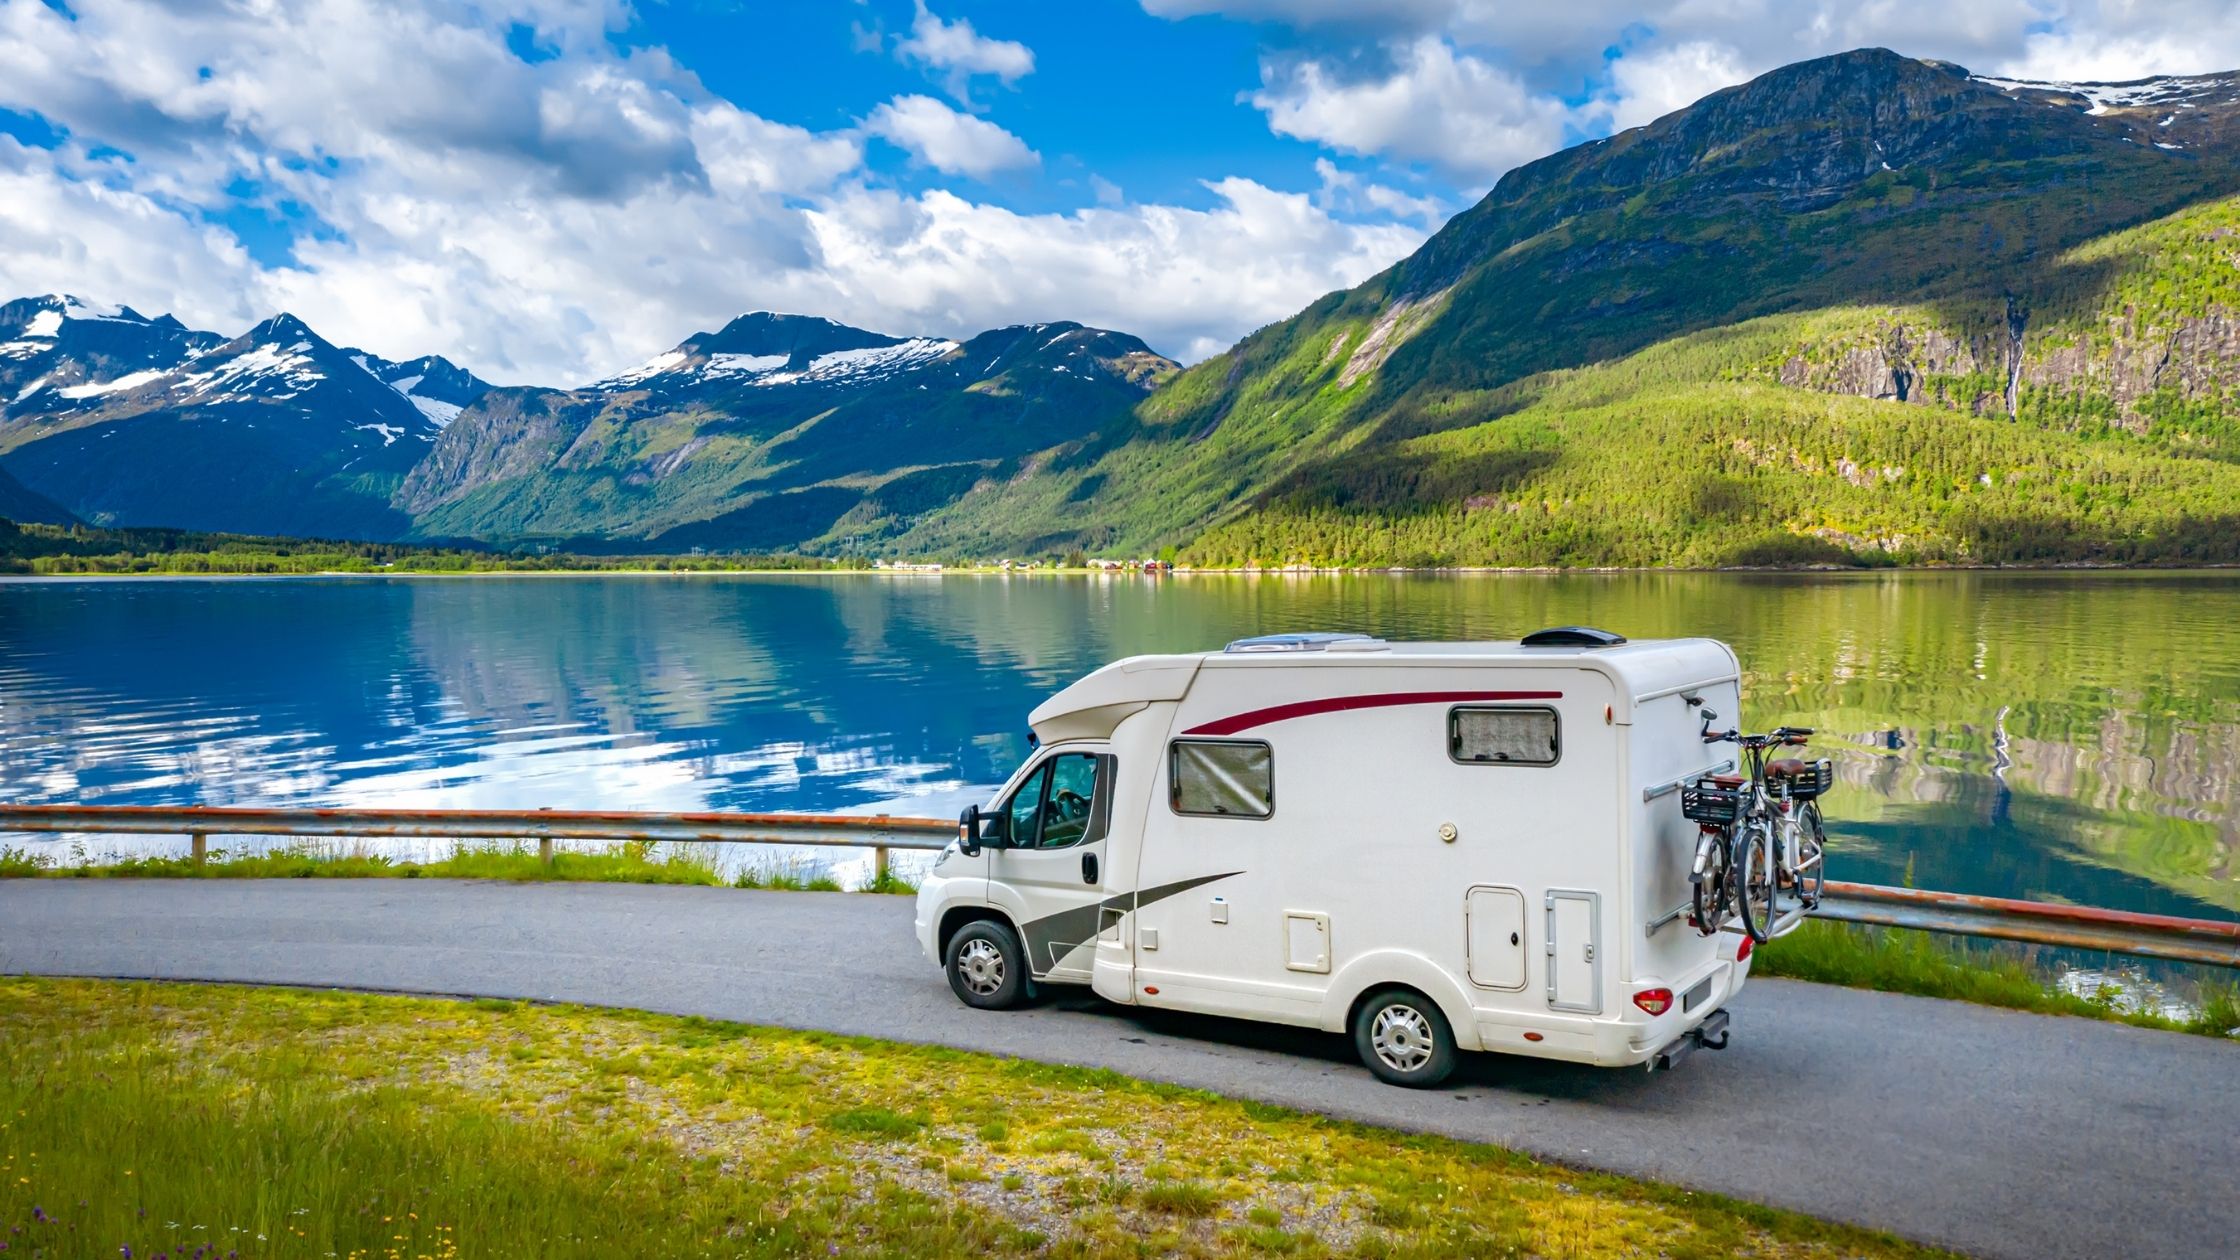 Hitting the Road This Summer? Be Sure Your RV Is Properly Insured With This Helpful Checklist